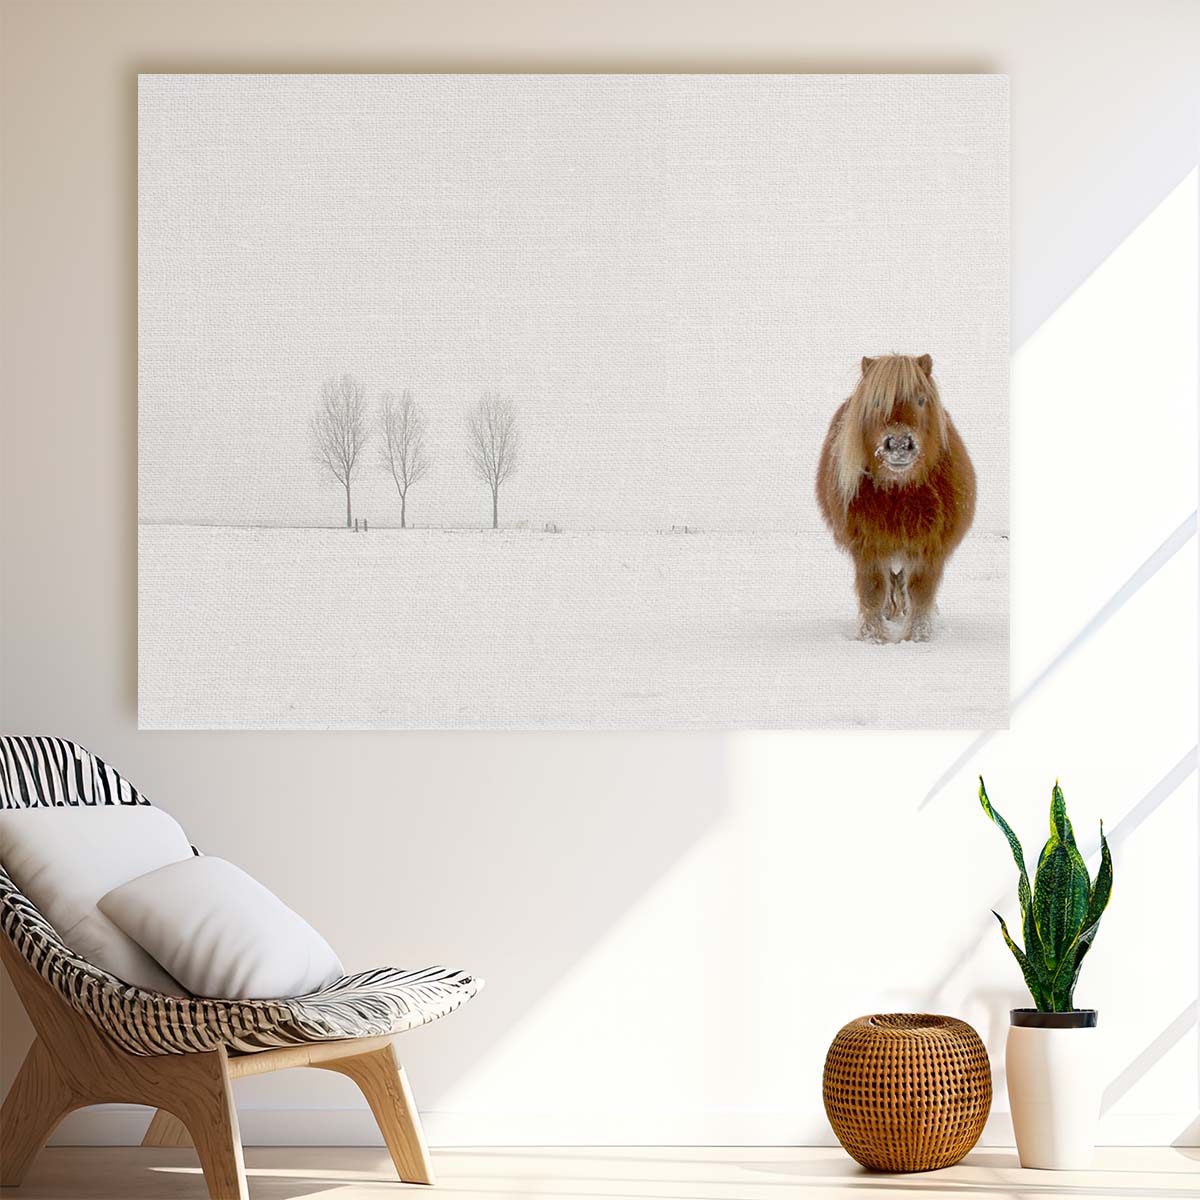 Solitary Pony in Snowy Landscape Wall Art by Luxuriance Designs. Made in USA.